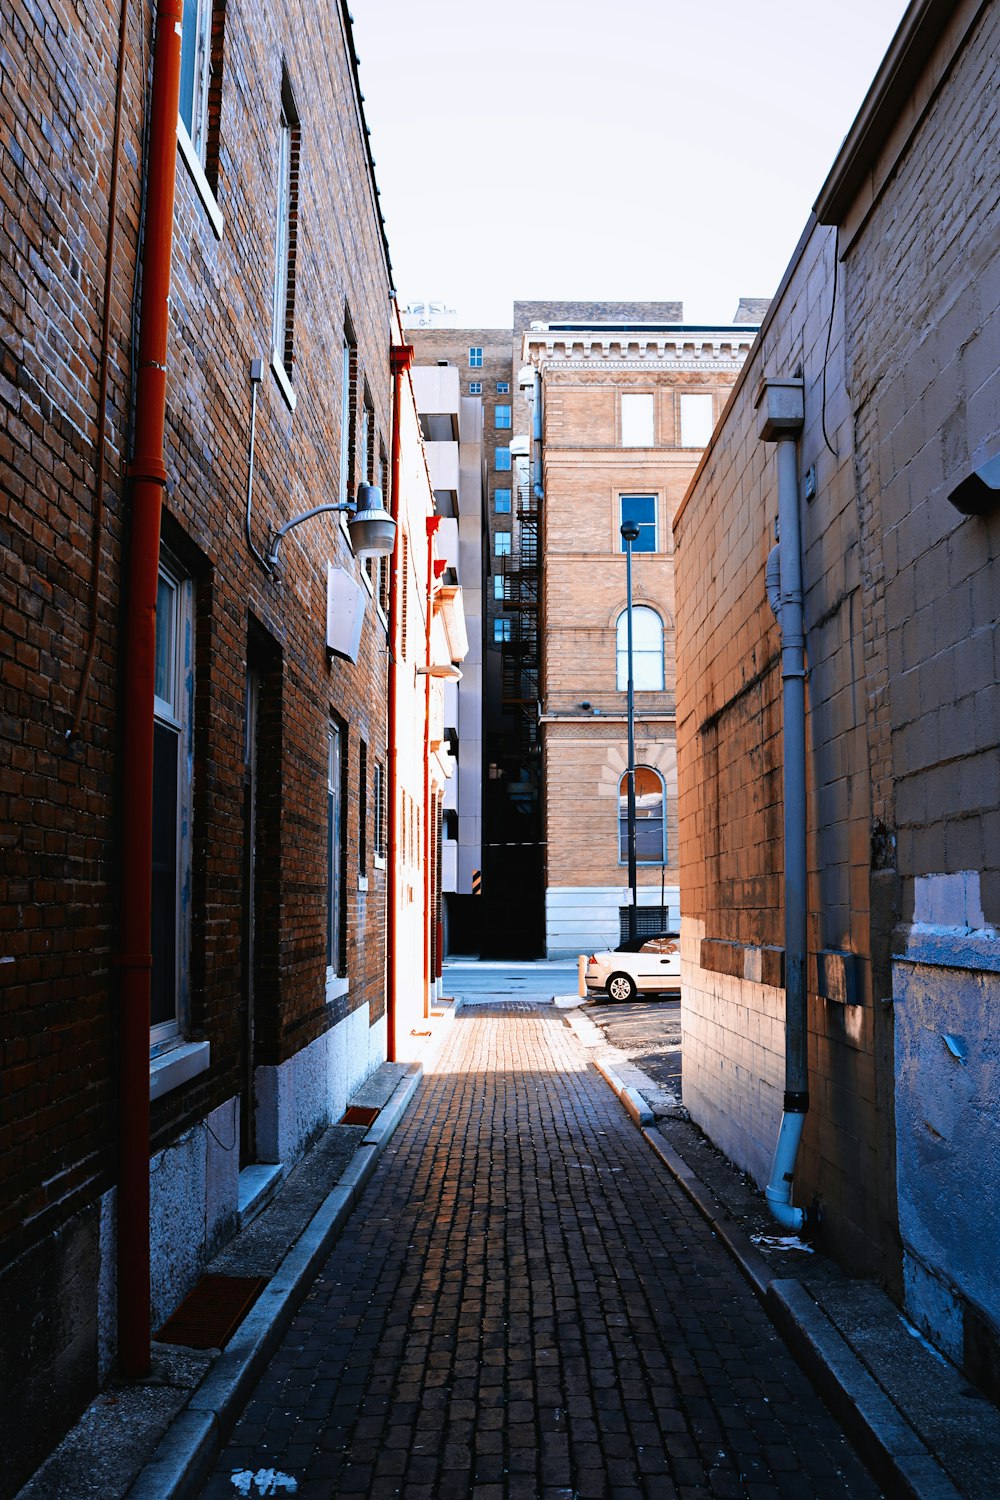 a brick street with buildings on both sides